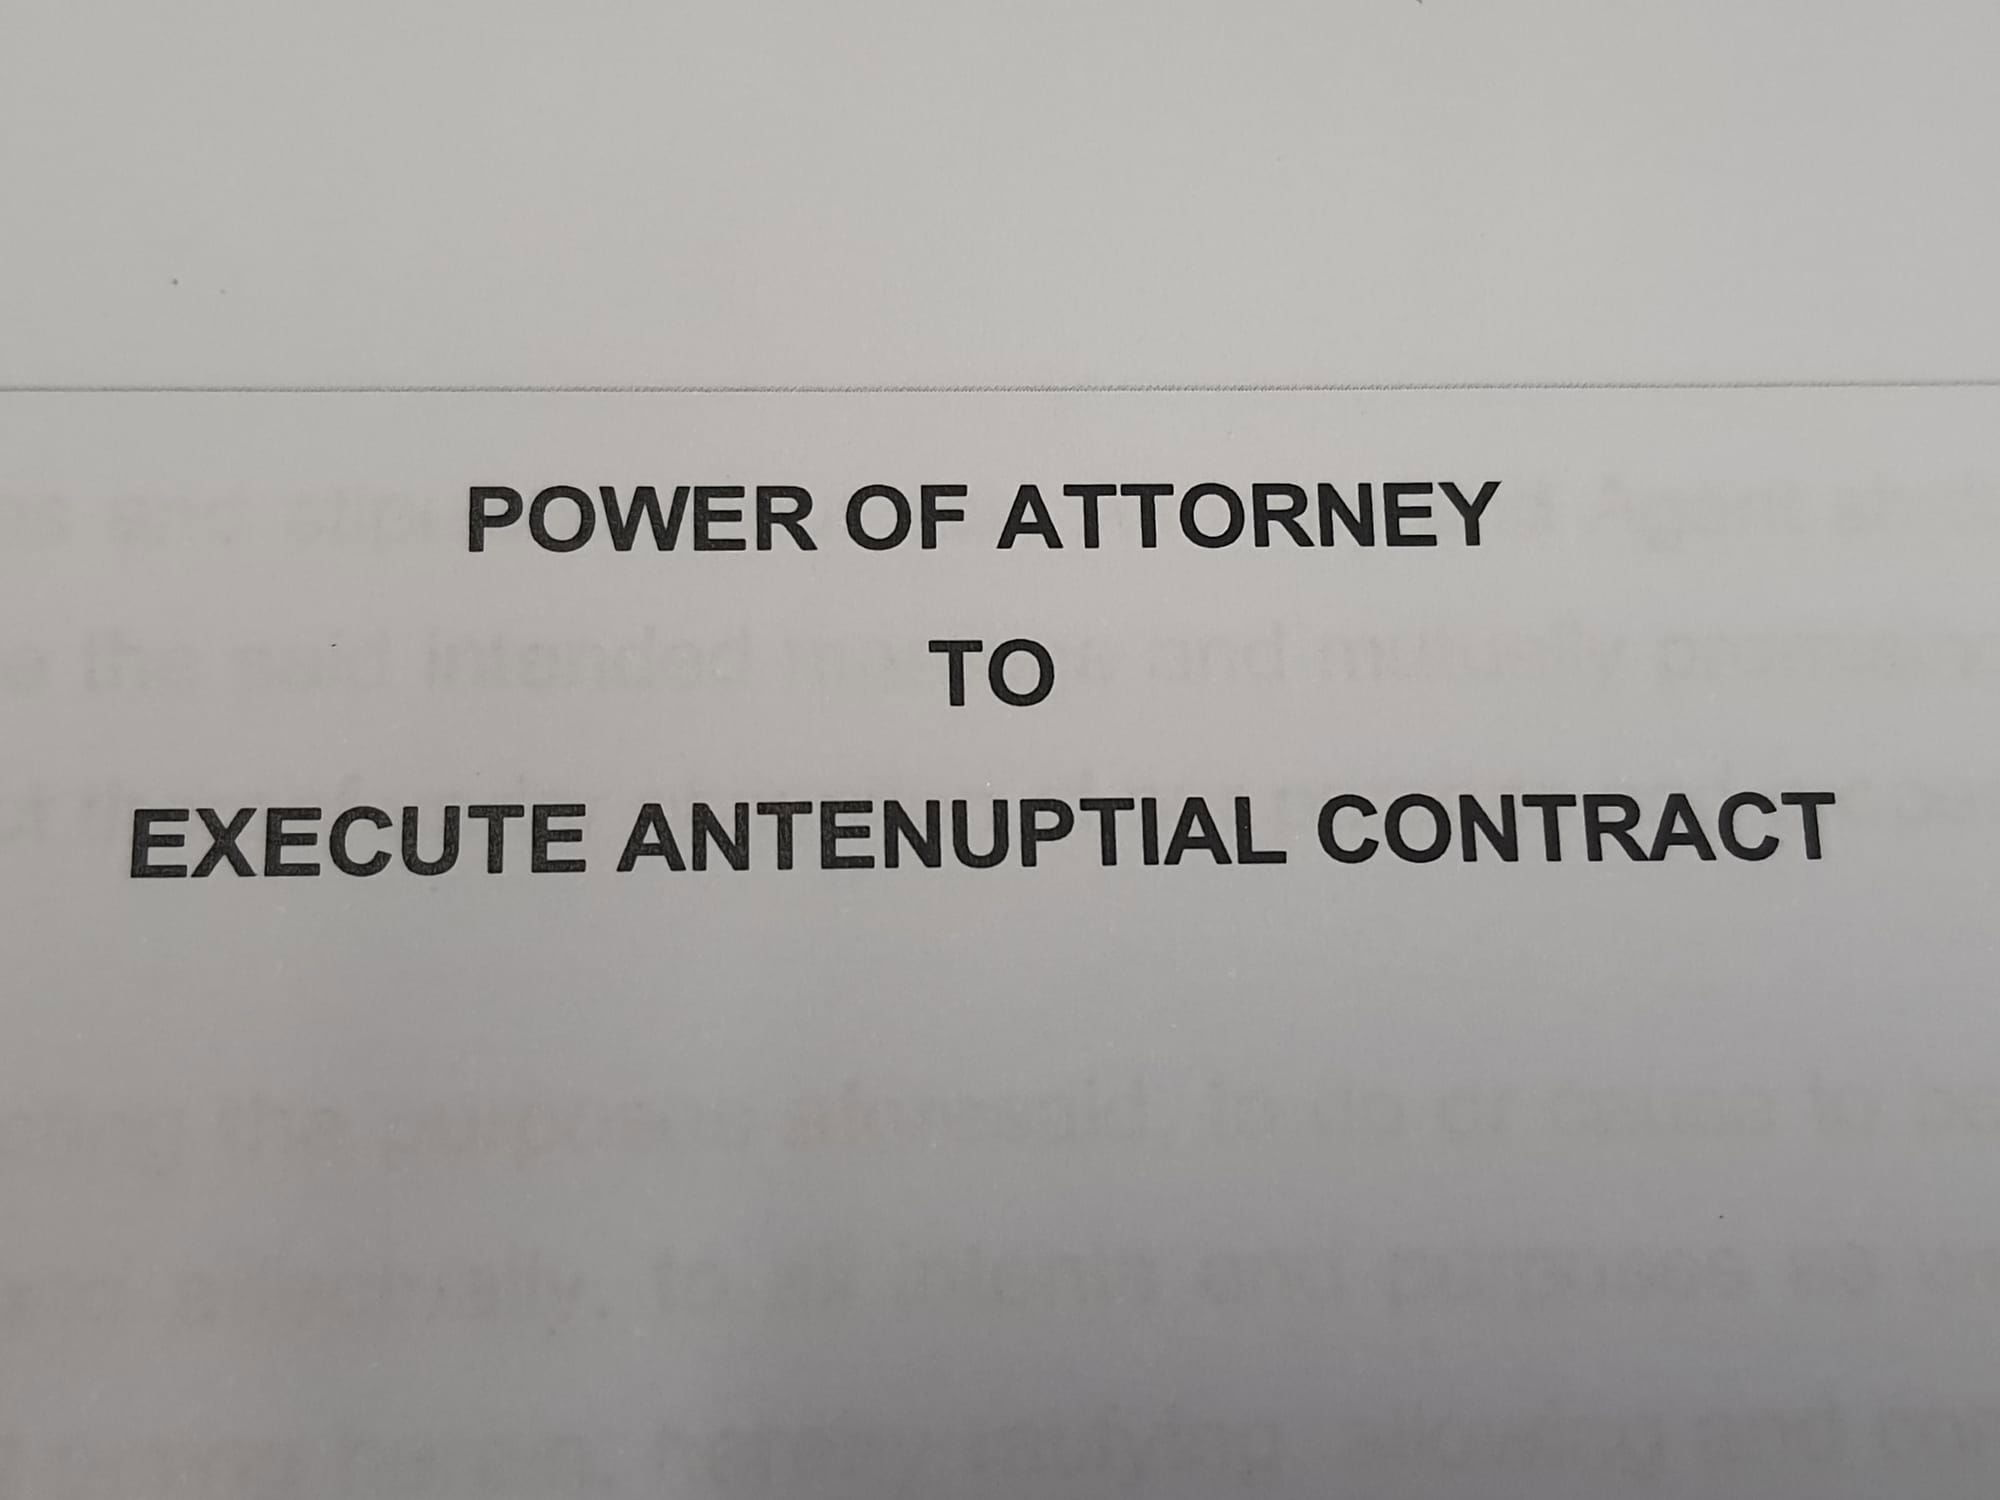 Power of Attorney to execute Antenuptial Contract.